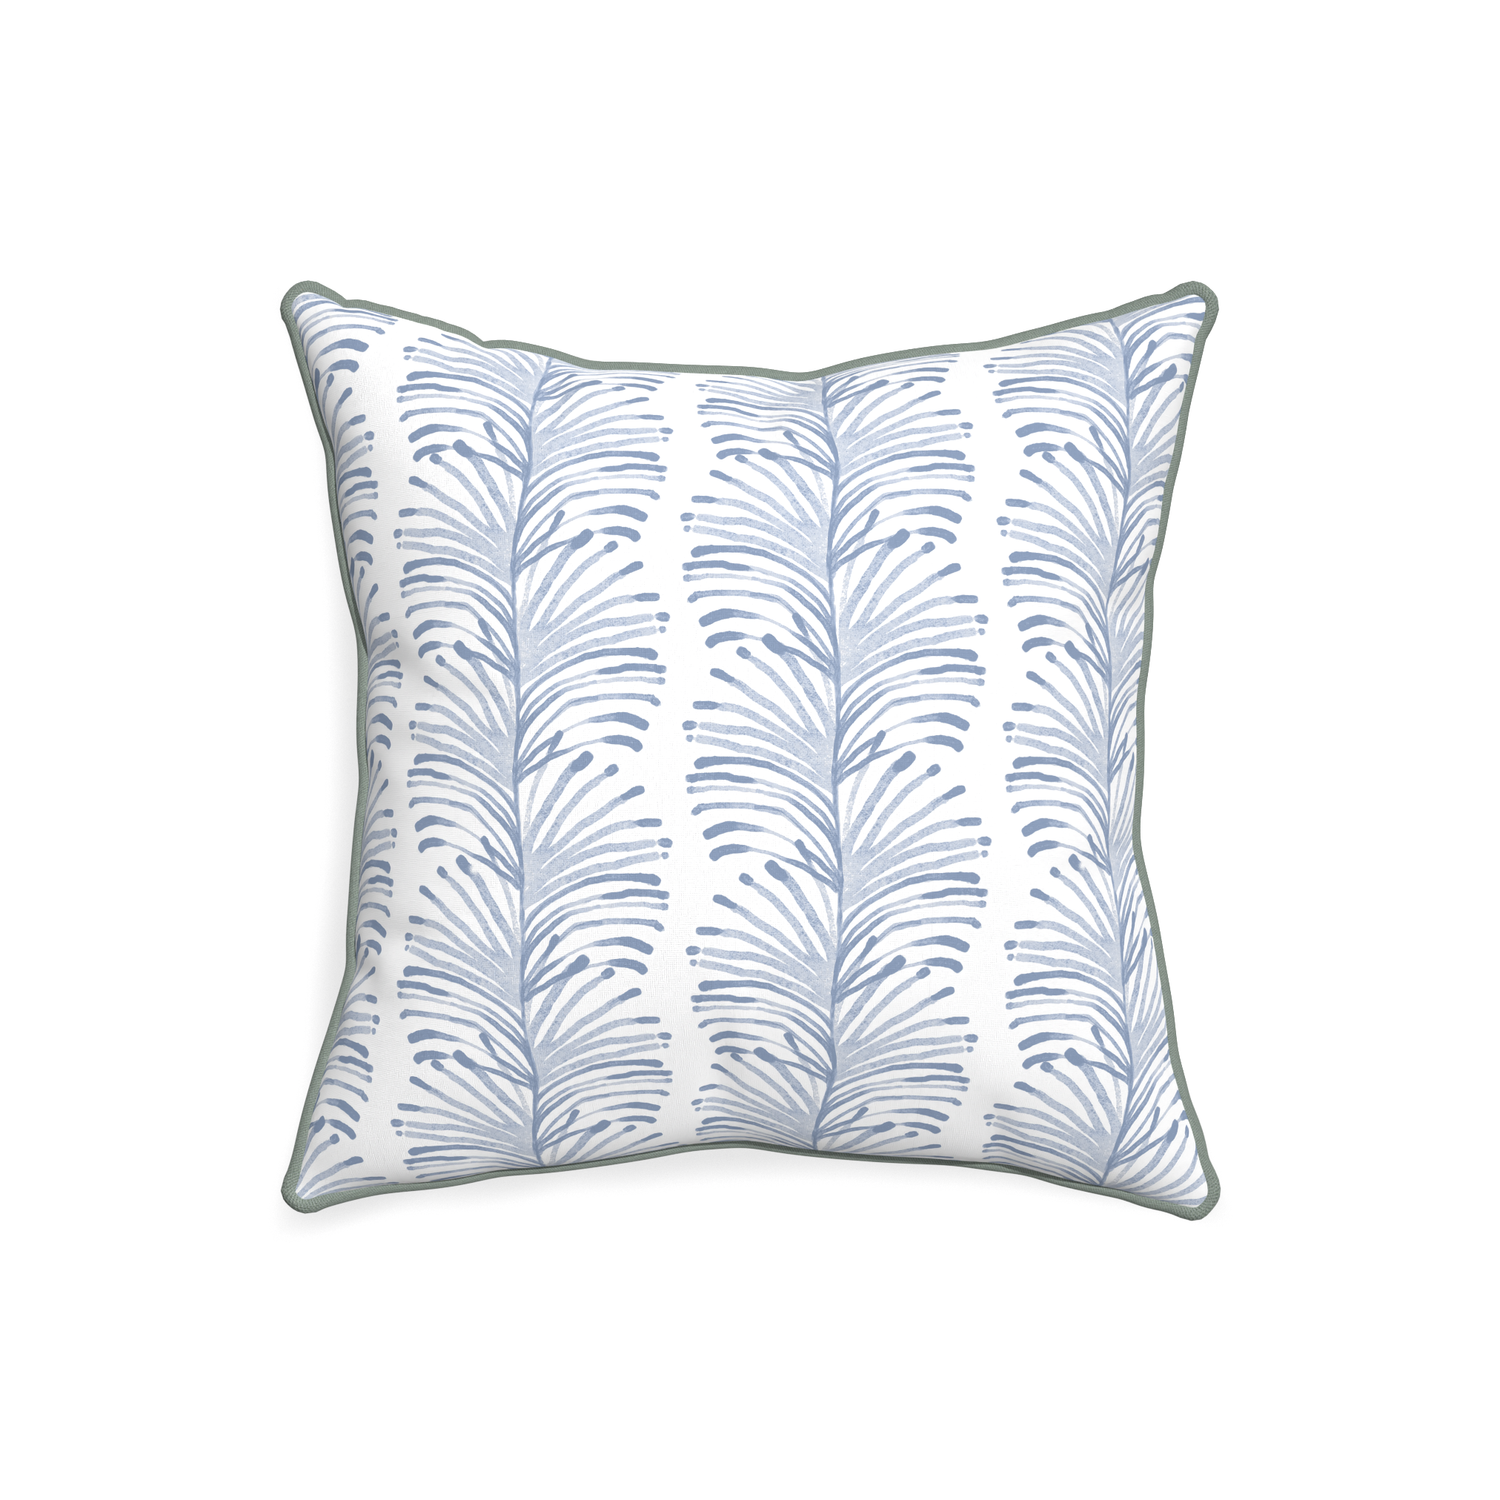 20-square emma sky custom sky blue botanical stripepillow with sage piping on white background